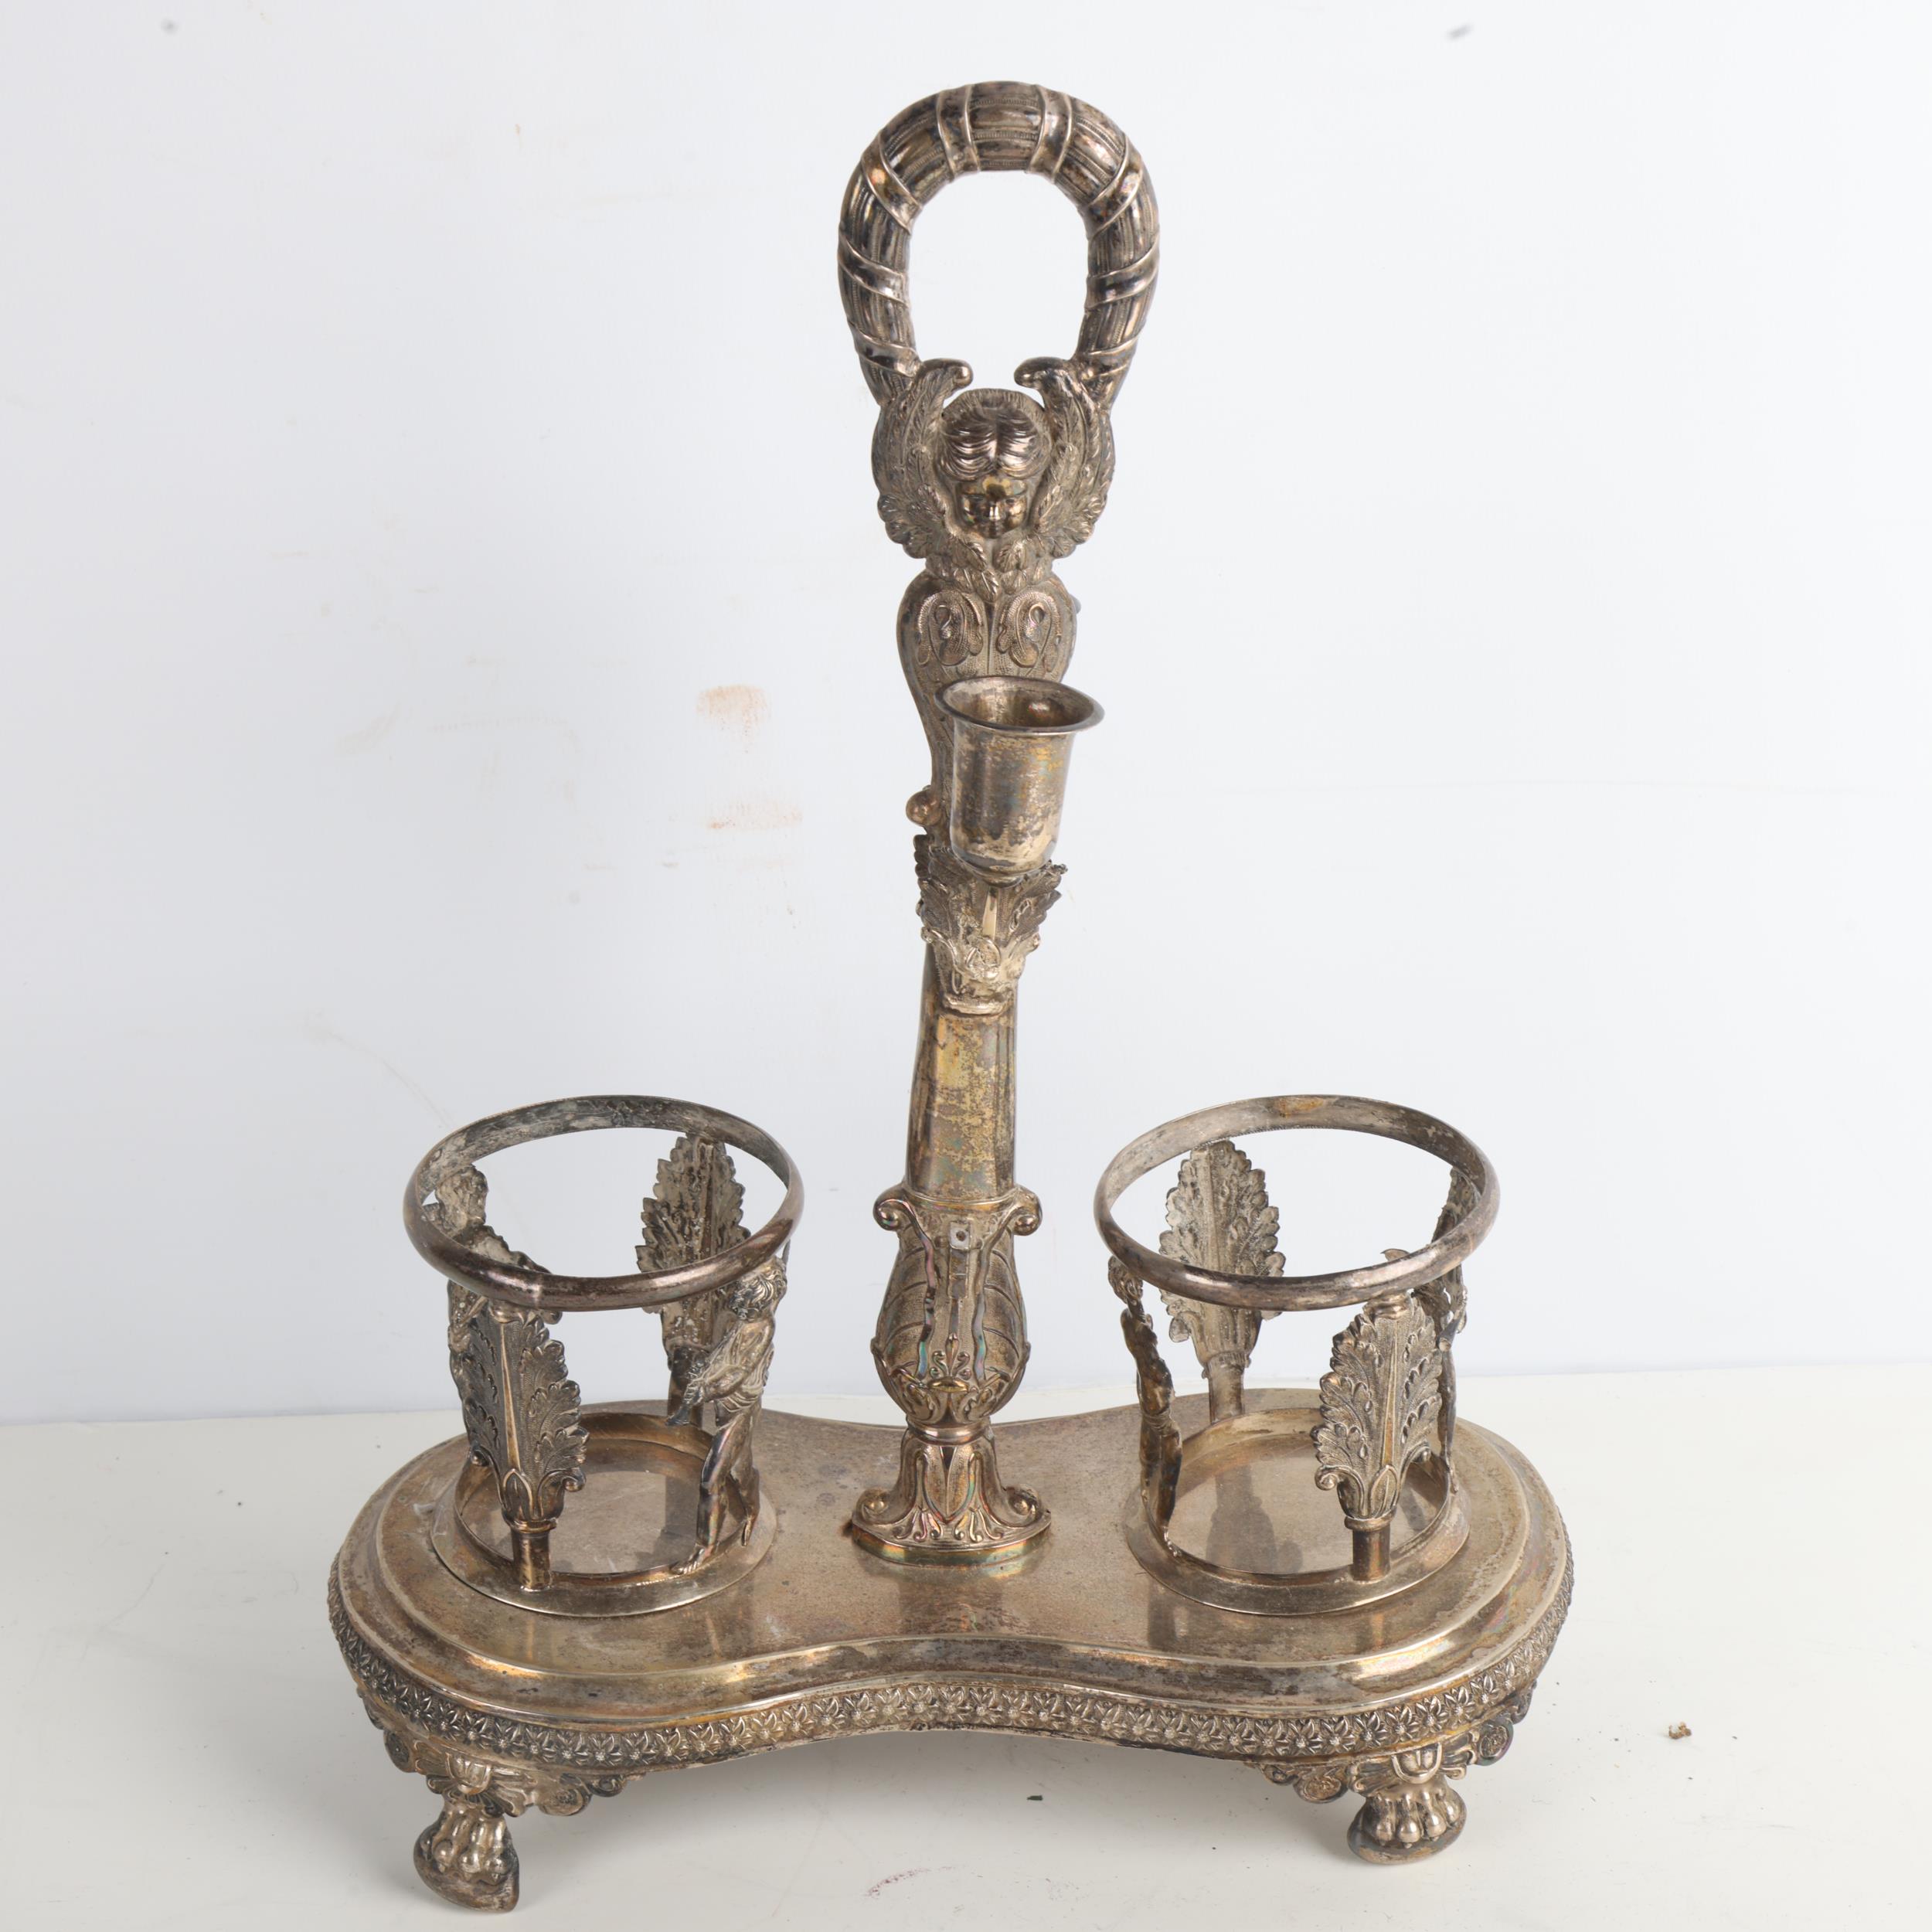 **WITHDRAWN** - A 19th century Continental silver Empire style oil and vinegar stand, - Image 2 of 3